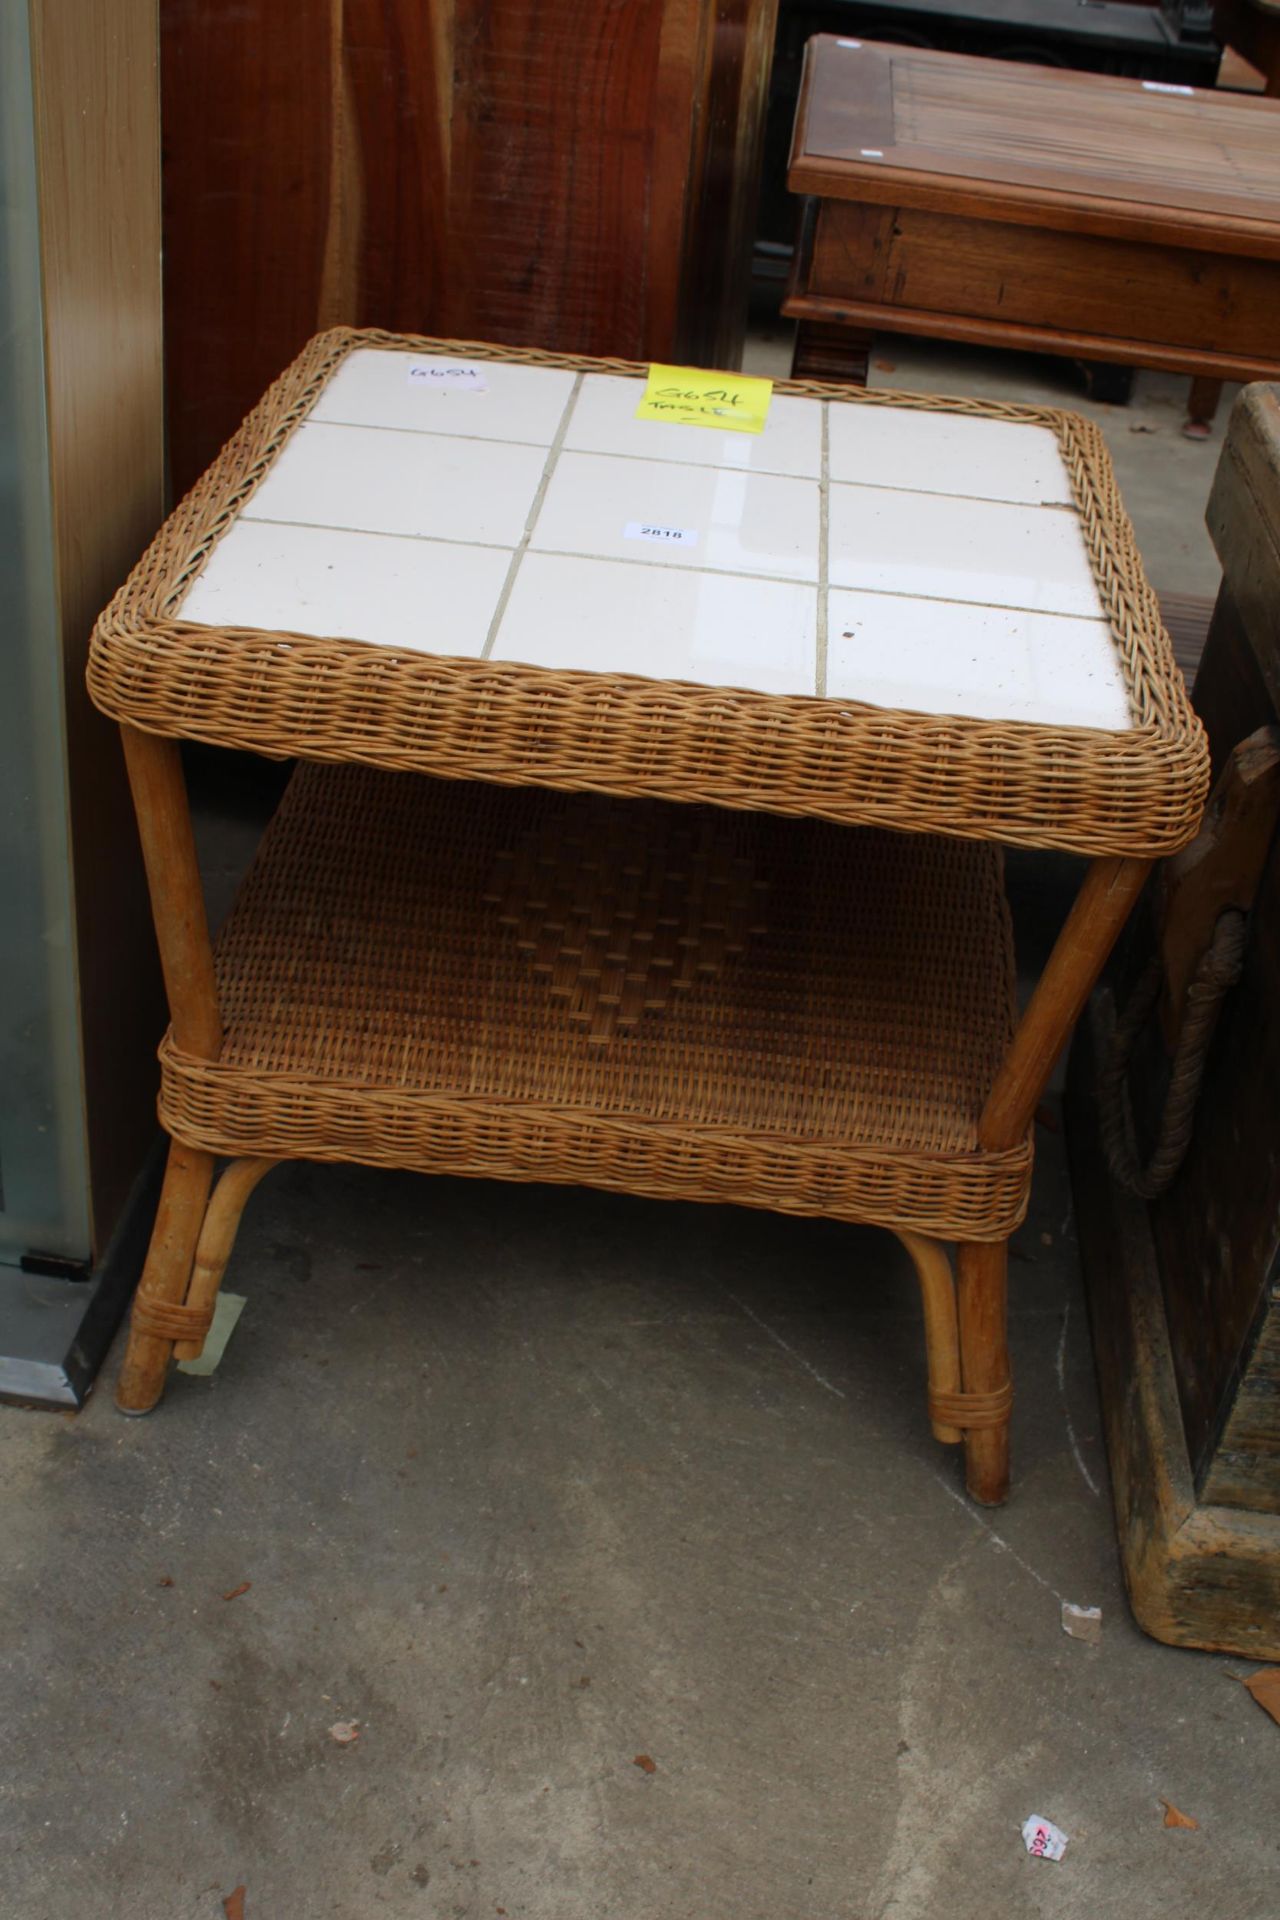 A TWO TIER WICKER LAMP TABLE WITH TILED TOP AND A GLASS FRONTED TWO DOOR BOOKCASE - Image 2 of 3